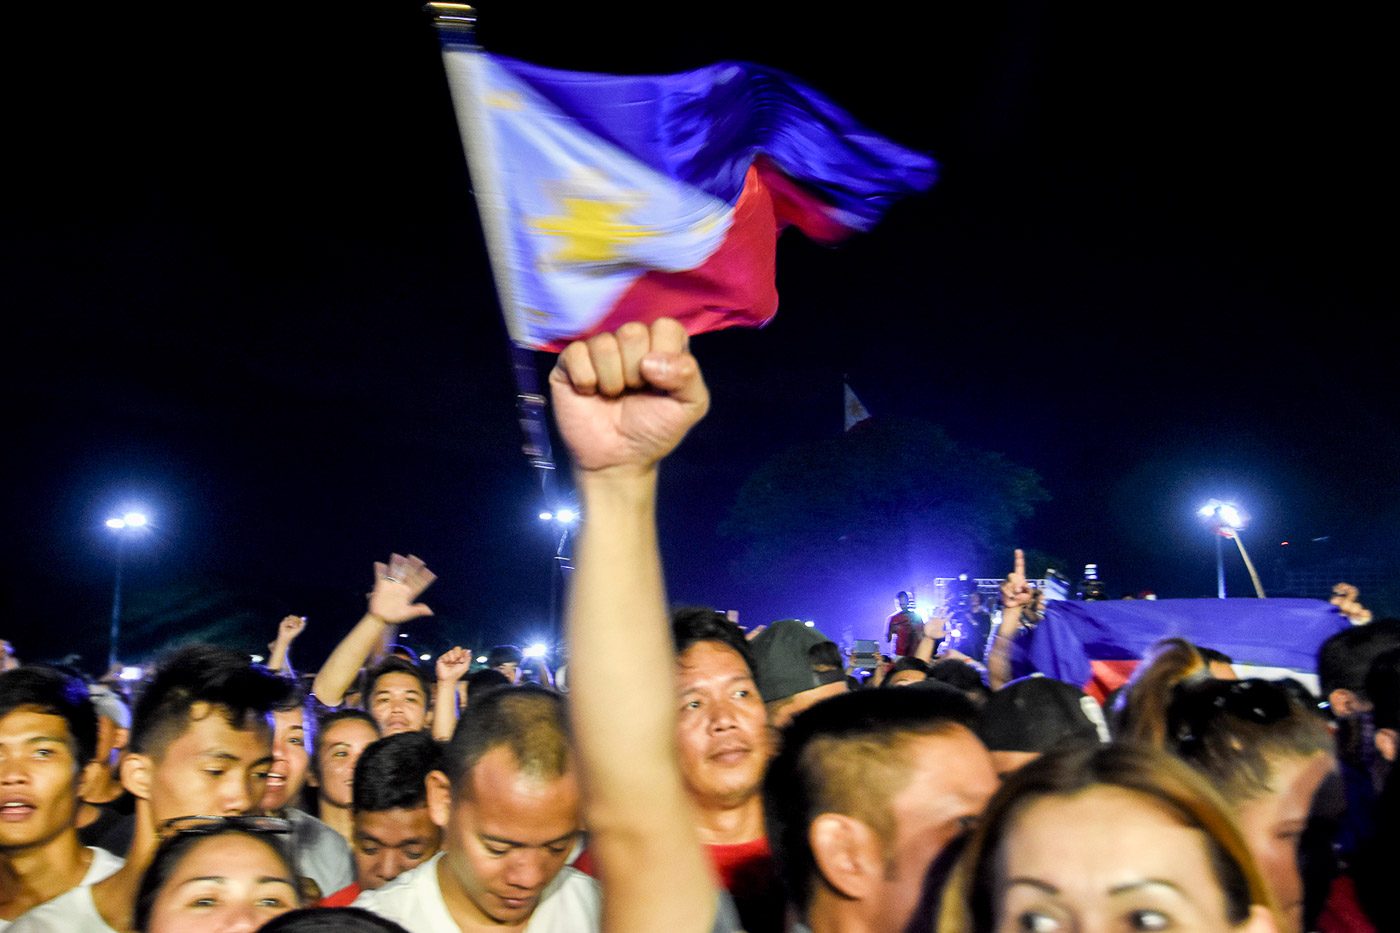 Fit of rage: Duterte supporters’ anti-Robredo rally in photos